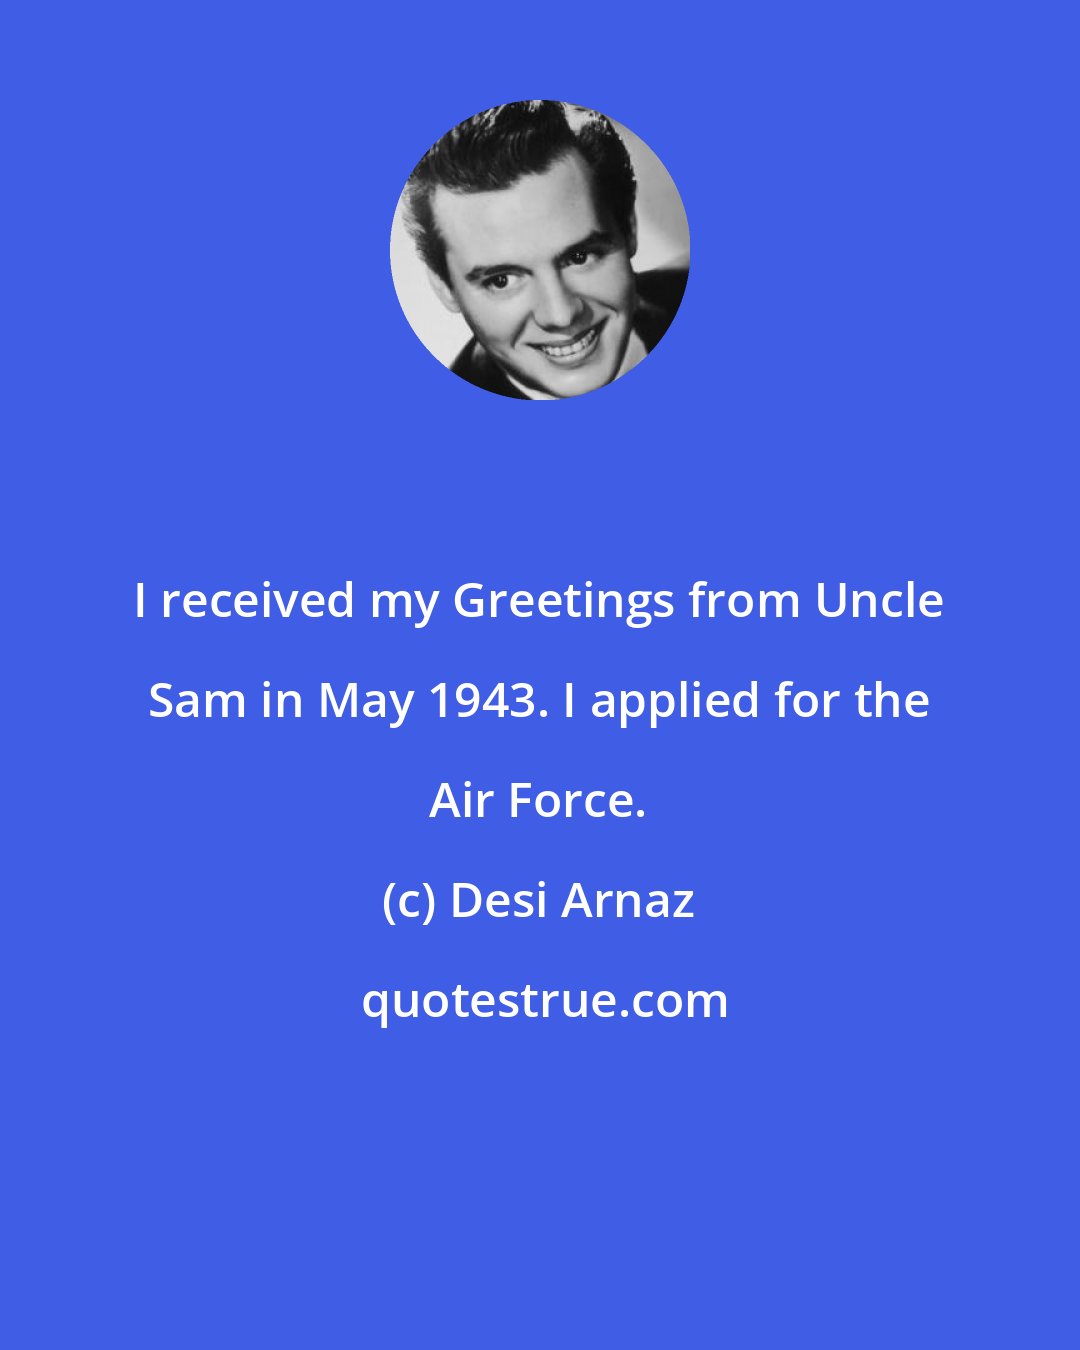 Desi Arnaz: I received my Greetings from Uncle Sam in May 1943. I applied for the Air Force.